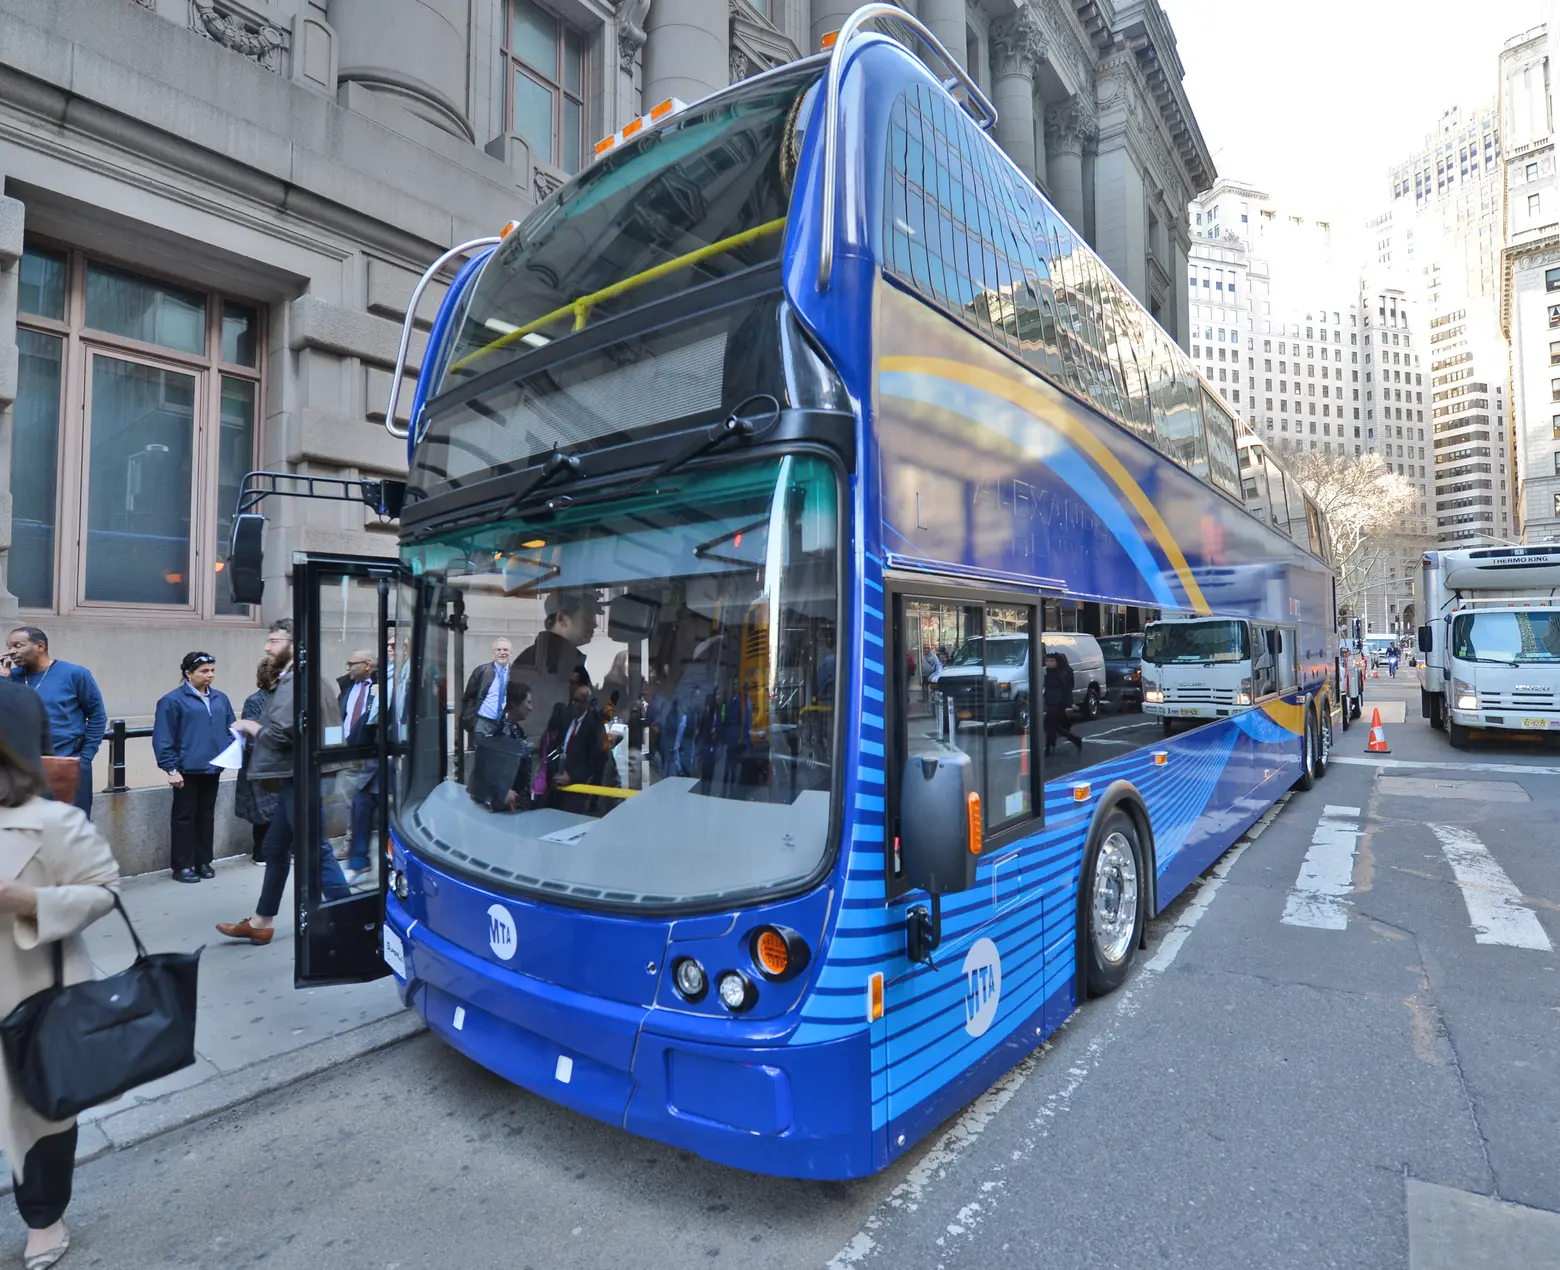 Double-decker buses are coming to NYC